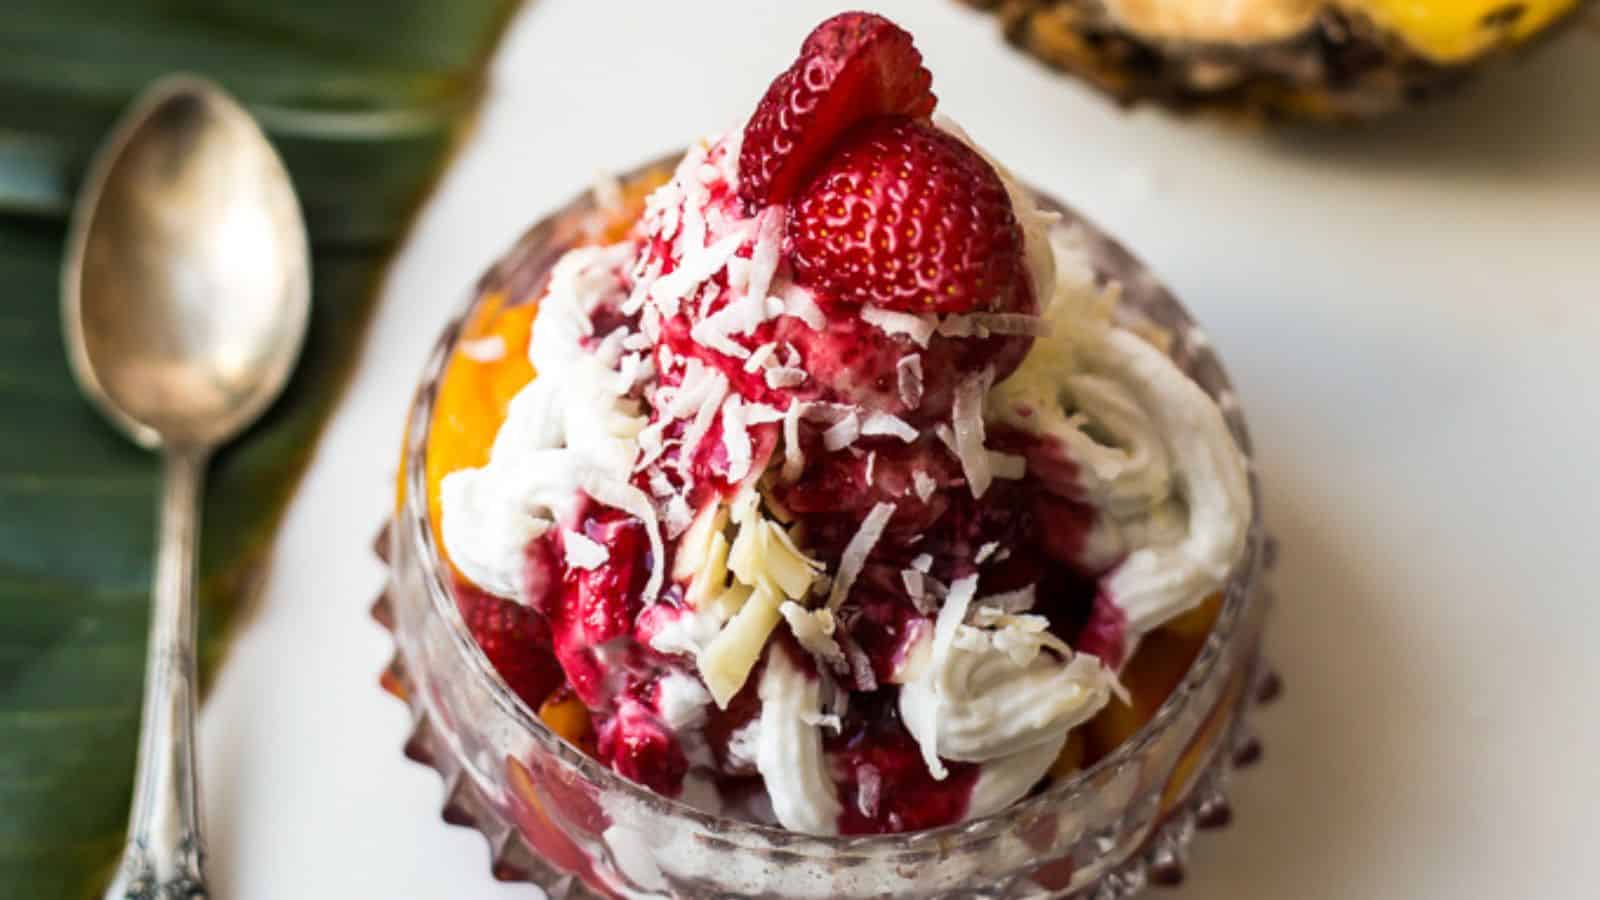 From Mango Bliss Overnight Oats to Protein-Packed Tuna Salad, these recipes are simple and quick. No fuss, just delicious options to kickstart your day with ease.